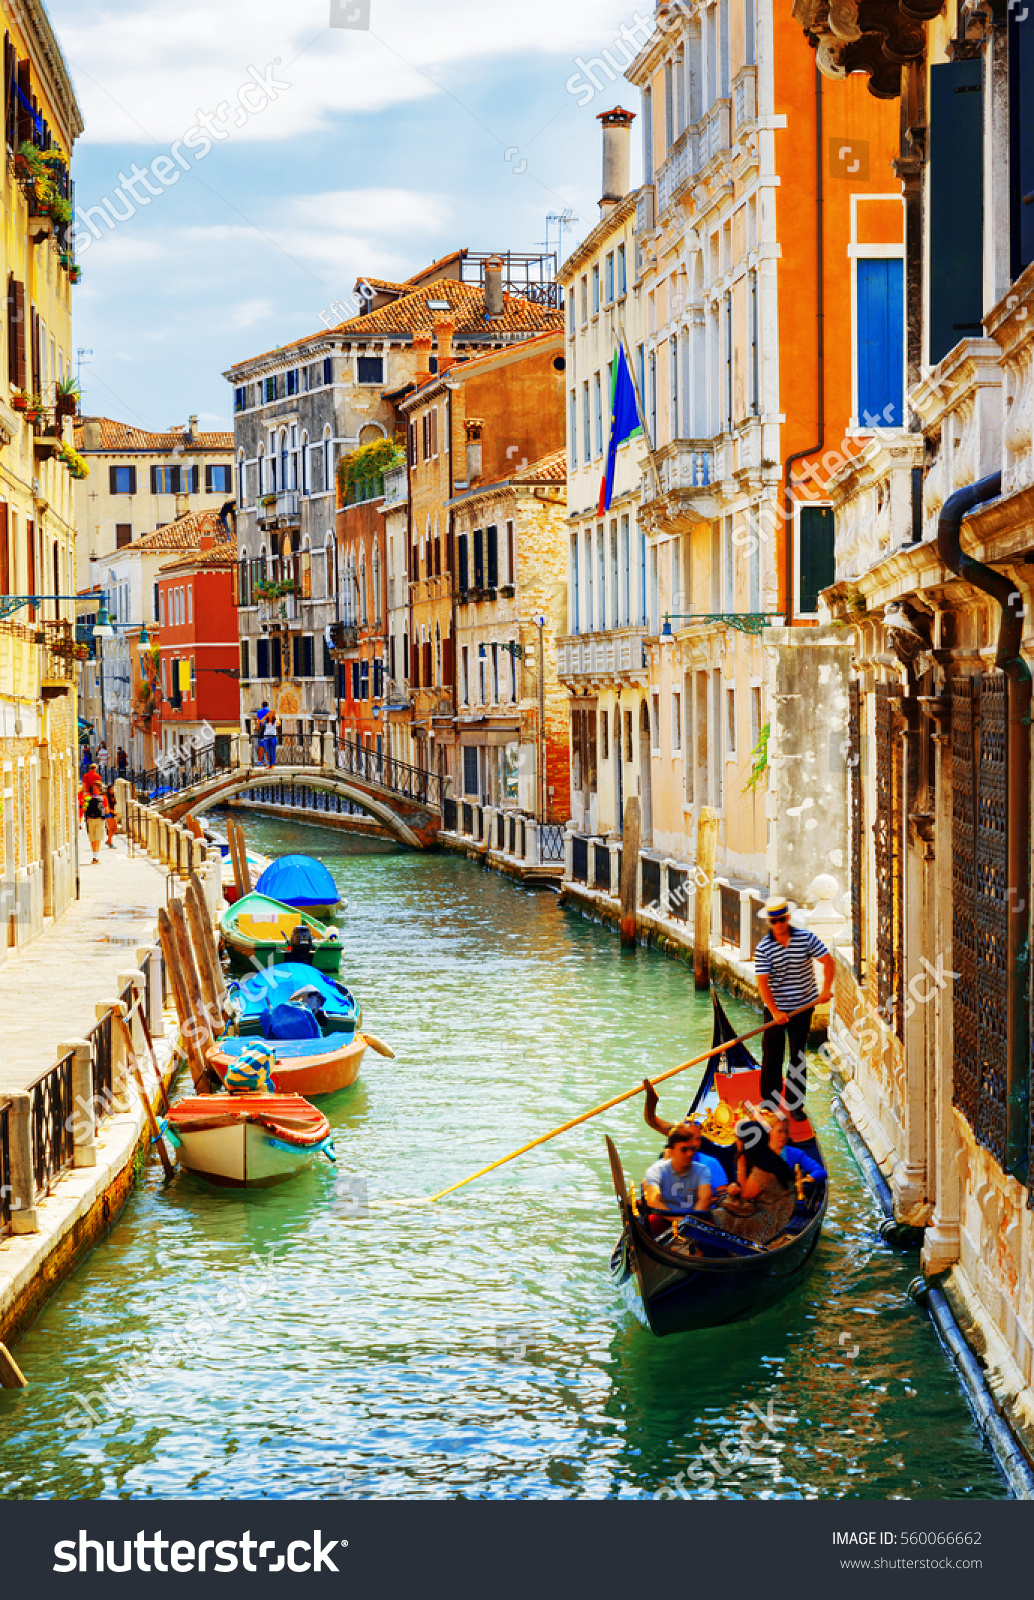 Tourists traveling in gondola. View of the Rio Marin Canal with boats from the Ponte de la Bergami in Venice, Italy. Venice is a popular tourist destination of Europe. #560066662